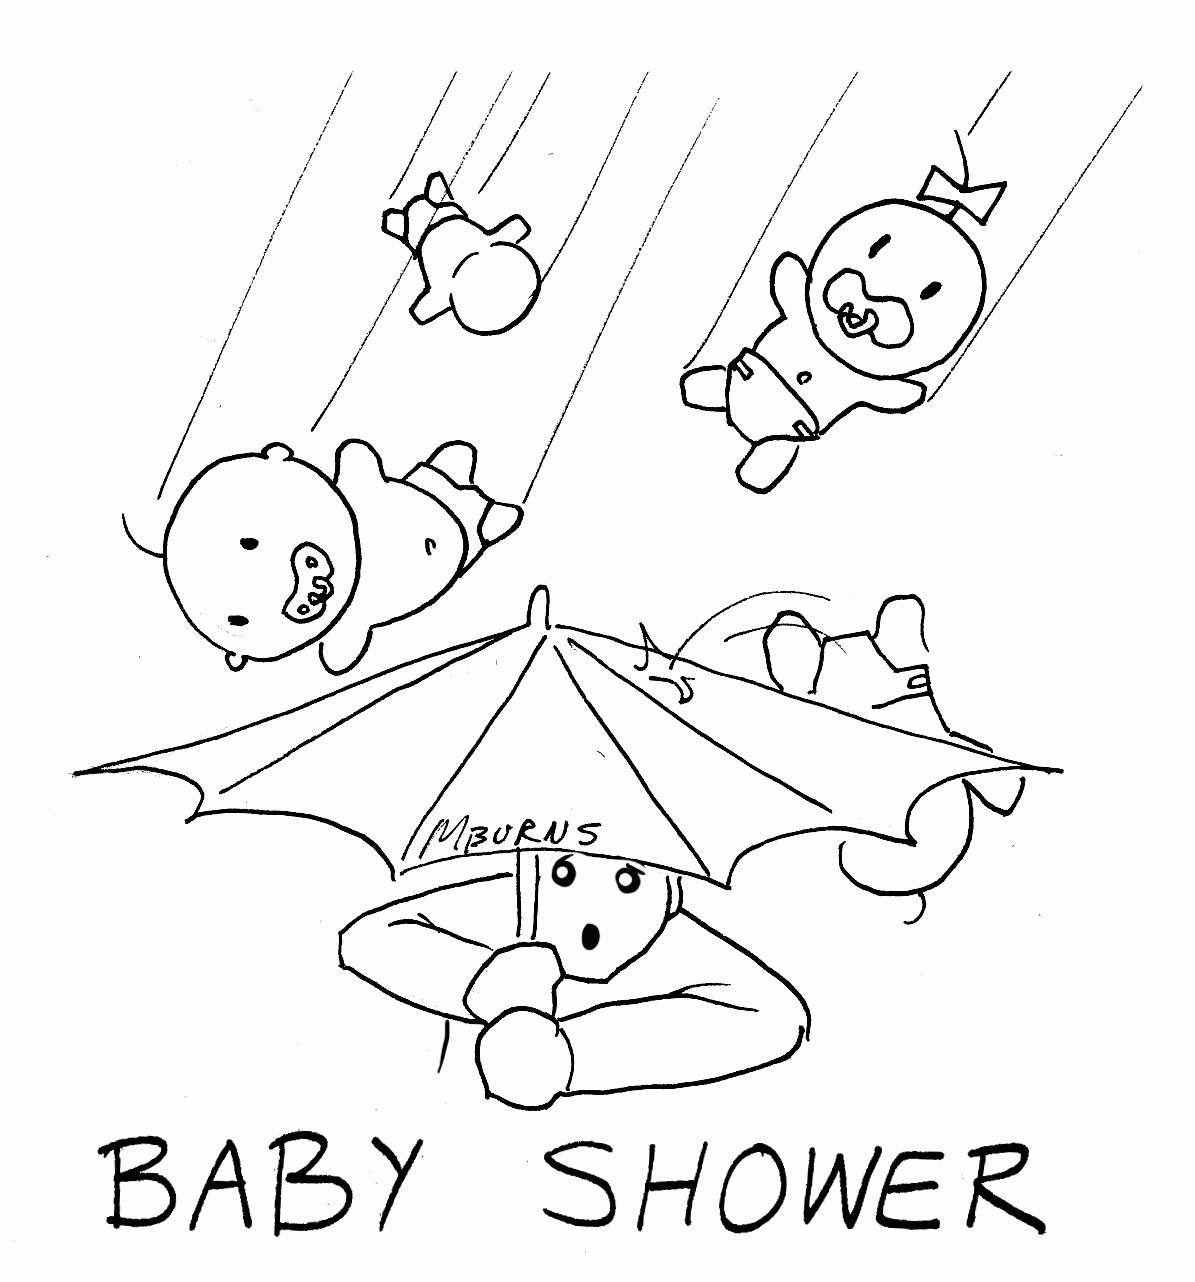 Shower Coloring Page - Coloring Pages for Kids and for Adults